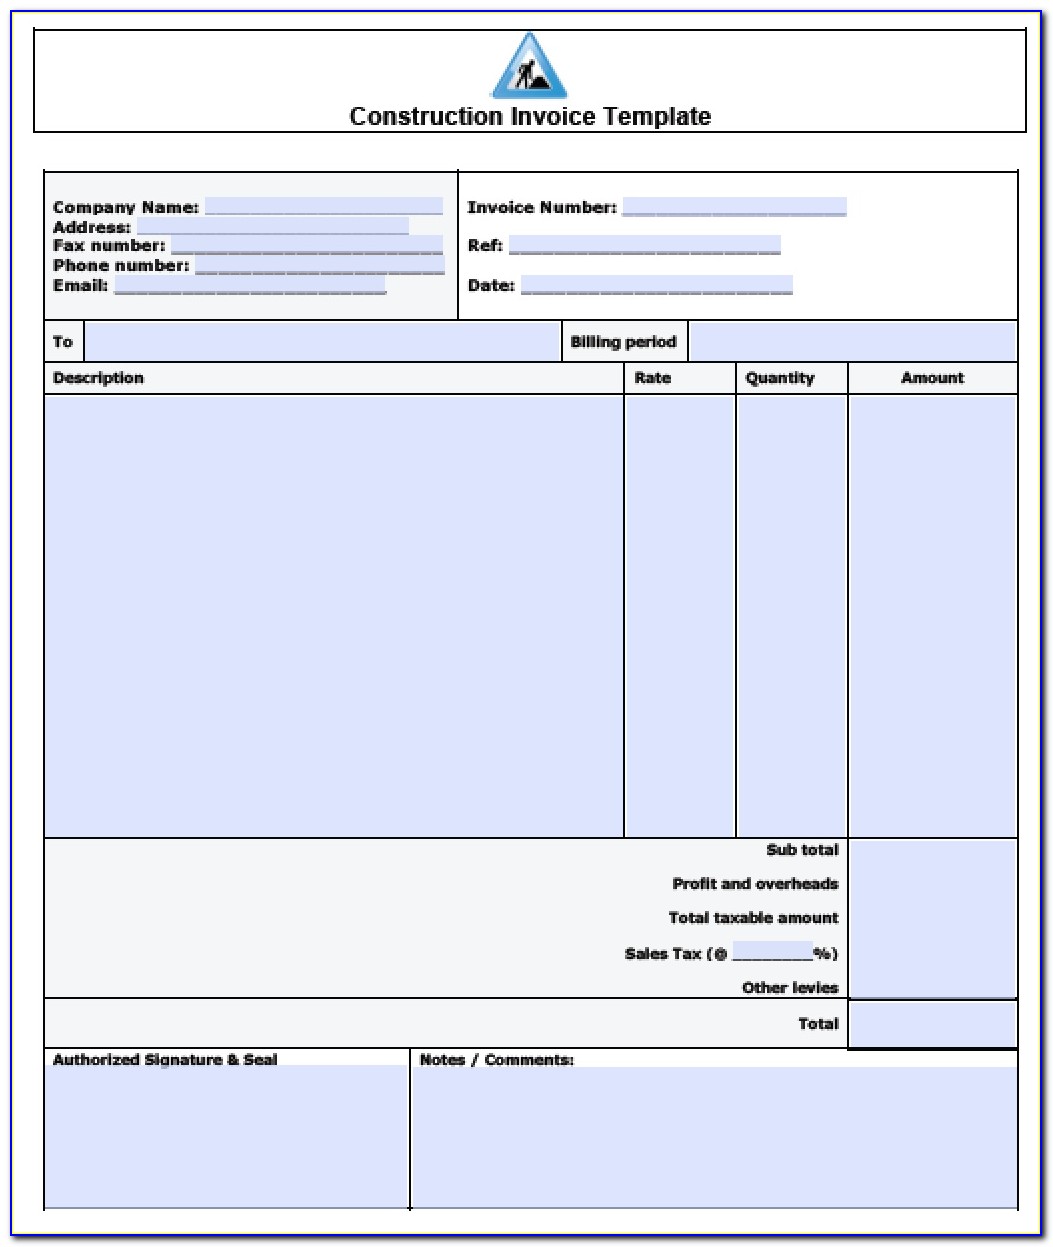 Construction Invoice Template Free Word